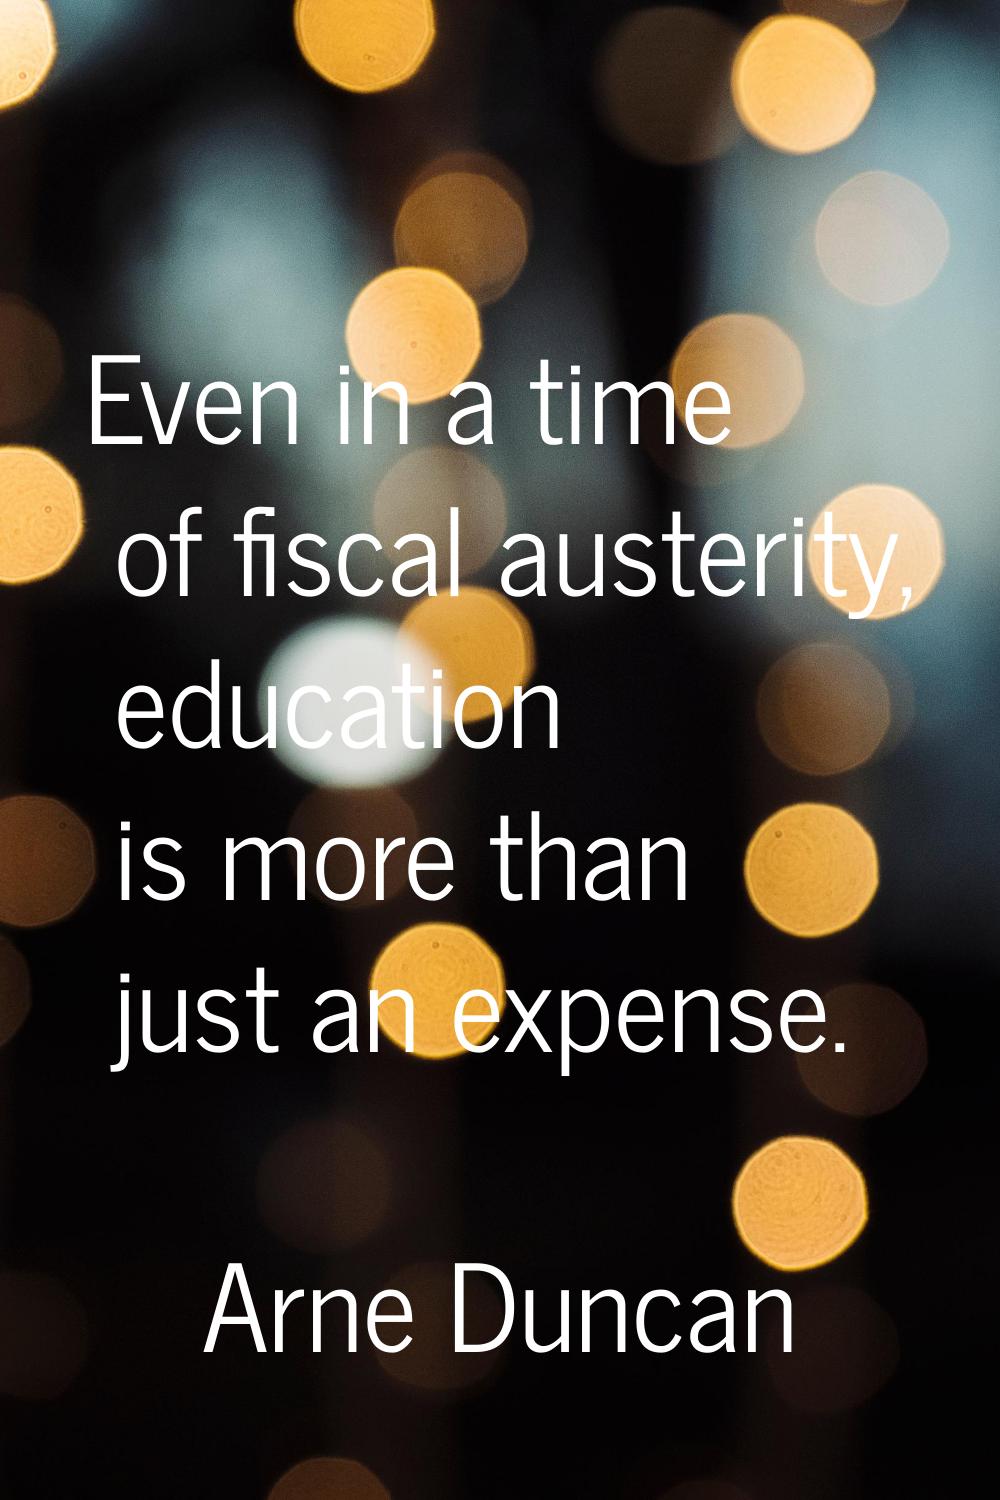 Even in a time of fiscal austerity, education is more than just an expense.